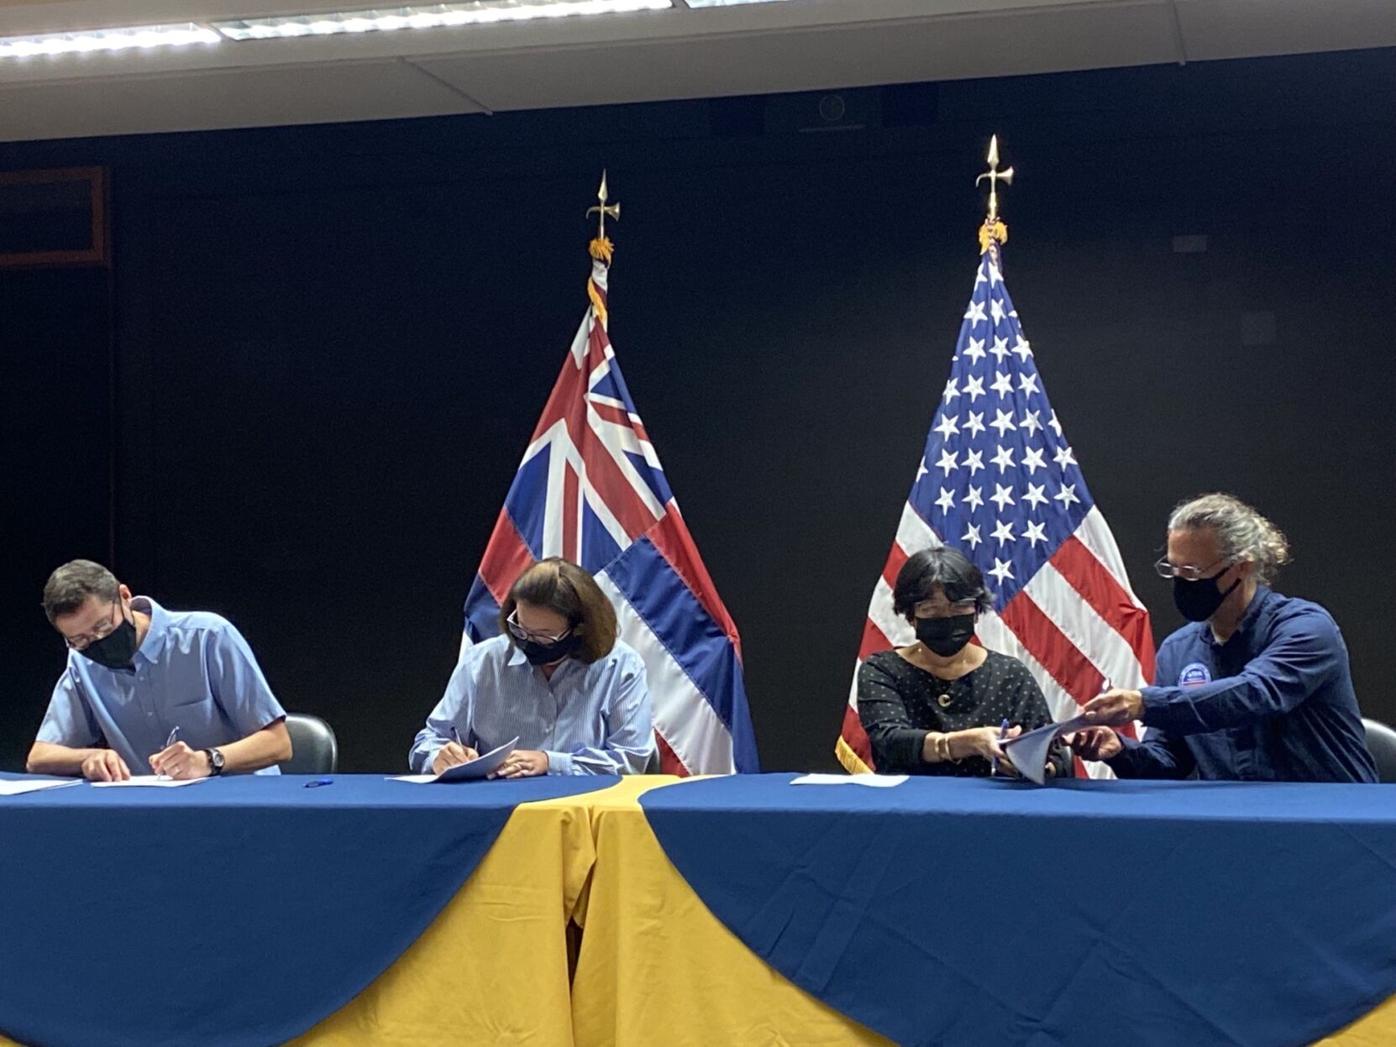 Representatives from the Hawai'i Department of Health, U.S. Navy, U.S. Army, and U.S. Environmental Protection Agency sign off on 'Drinking Water Sampling Plan.'